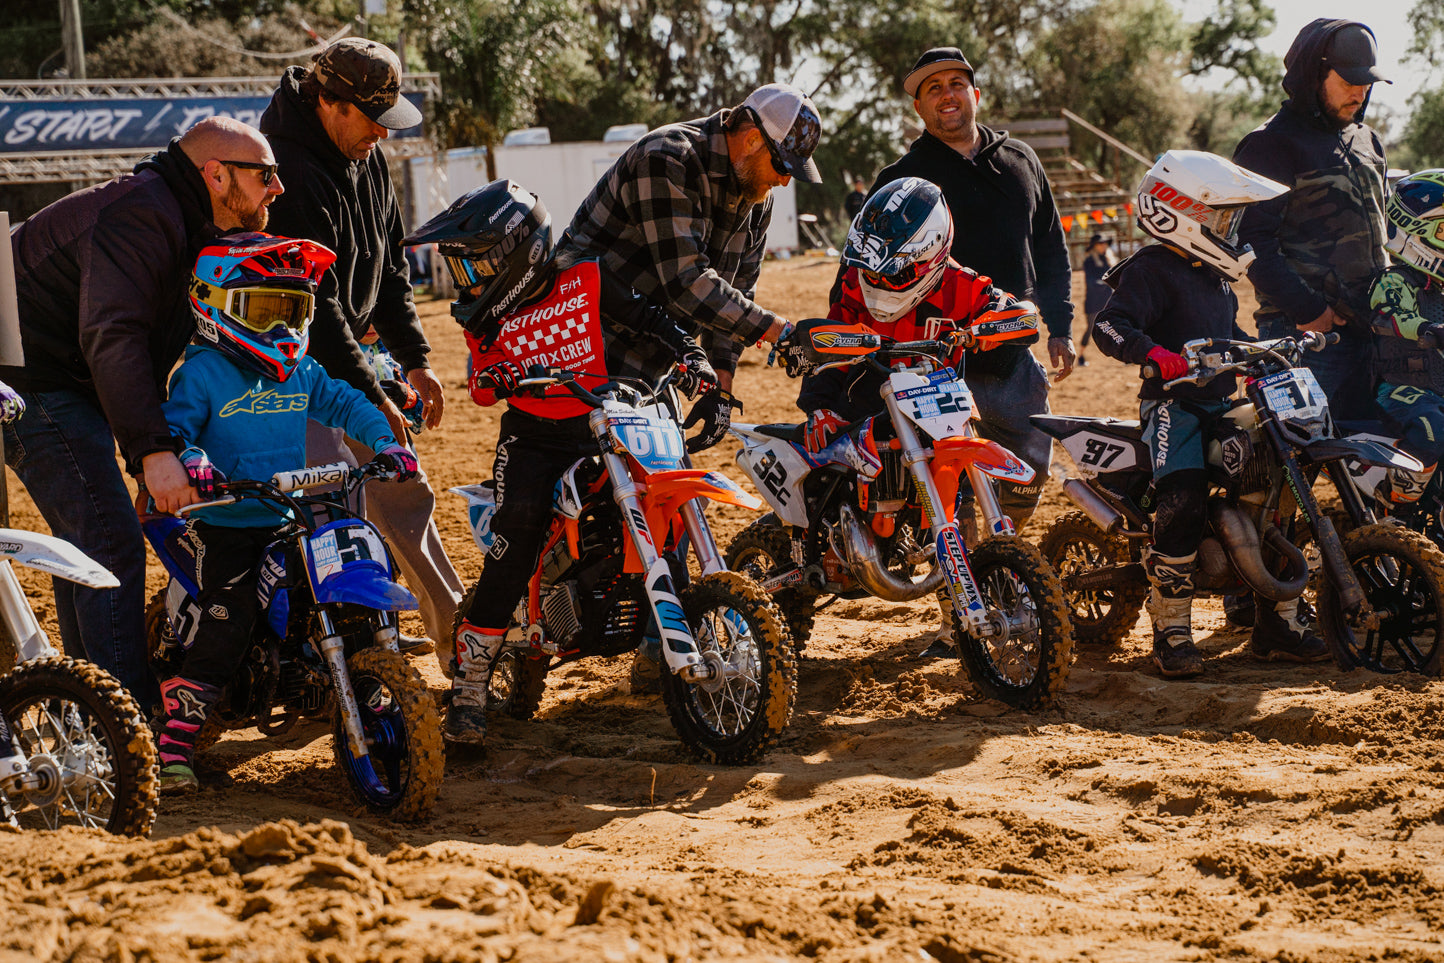 Small bikes - 50 cc and 65 cc - Nihilo Tribe - Day in the Dirt